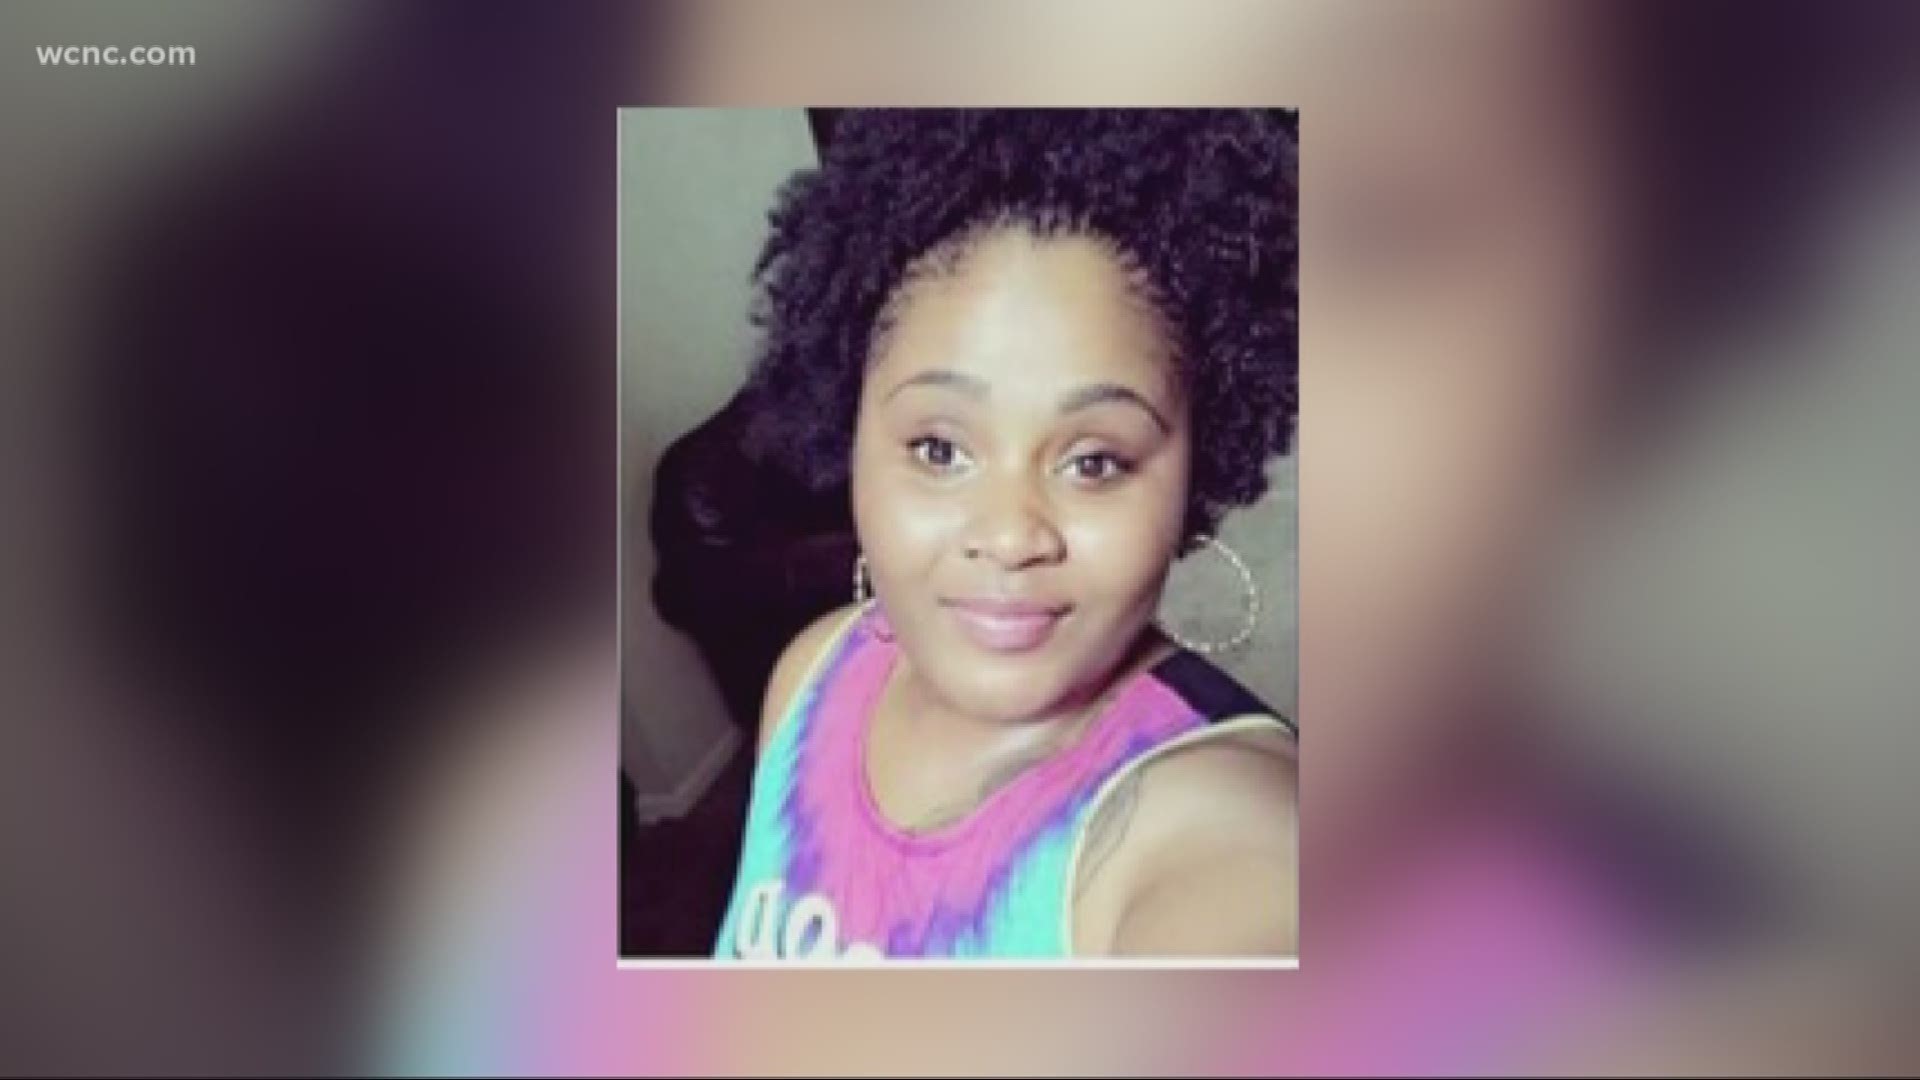 Police say they found the body of a missing Concord woman in Charlotte Sunday.